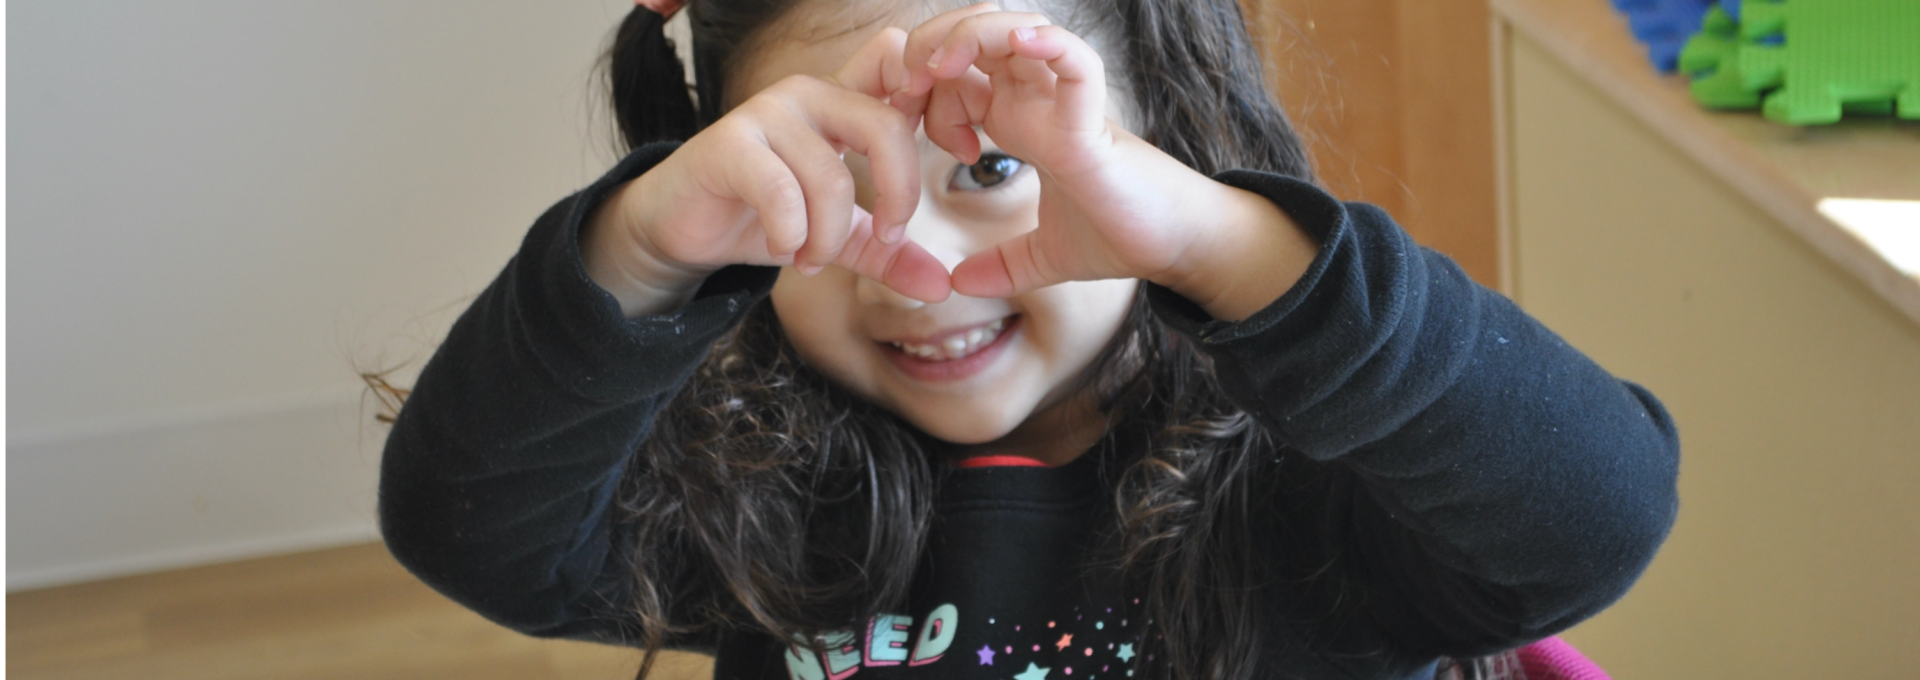 Little girl making the shape of a heart with her hands.